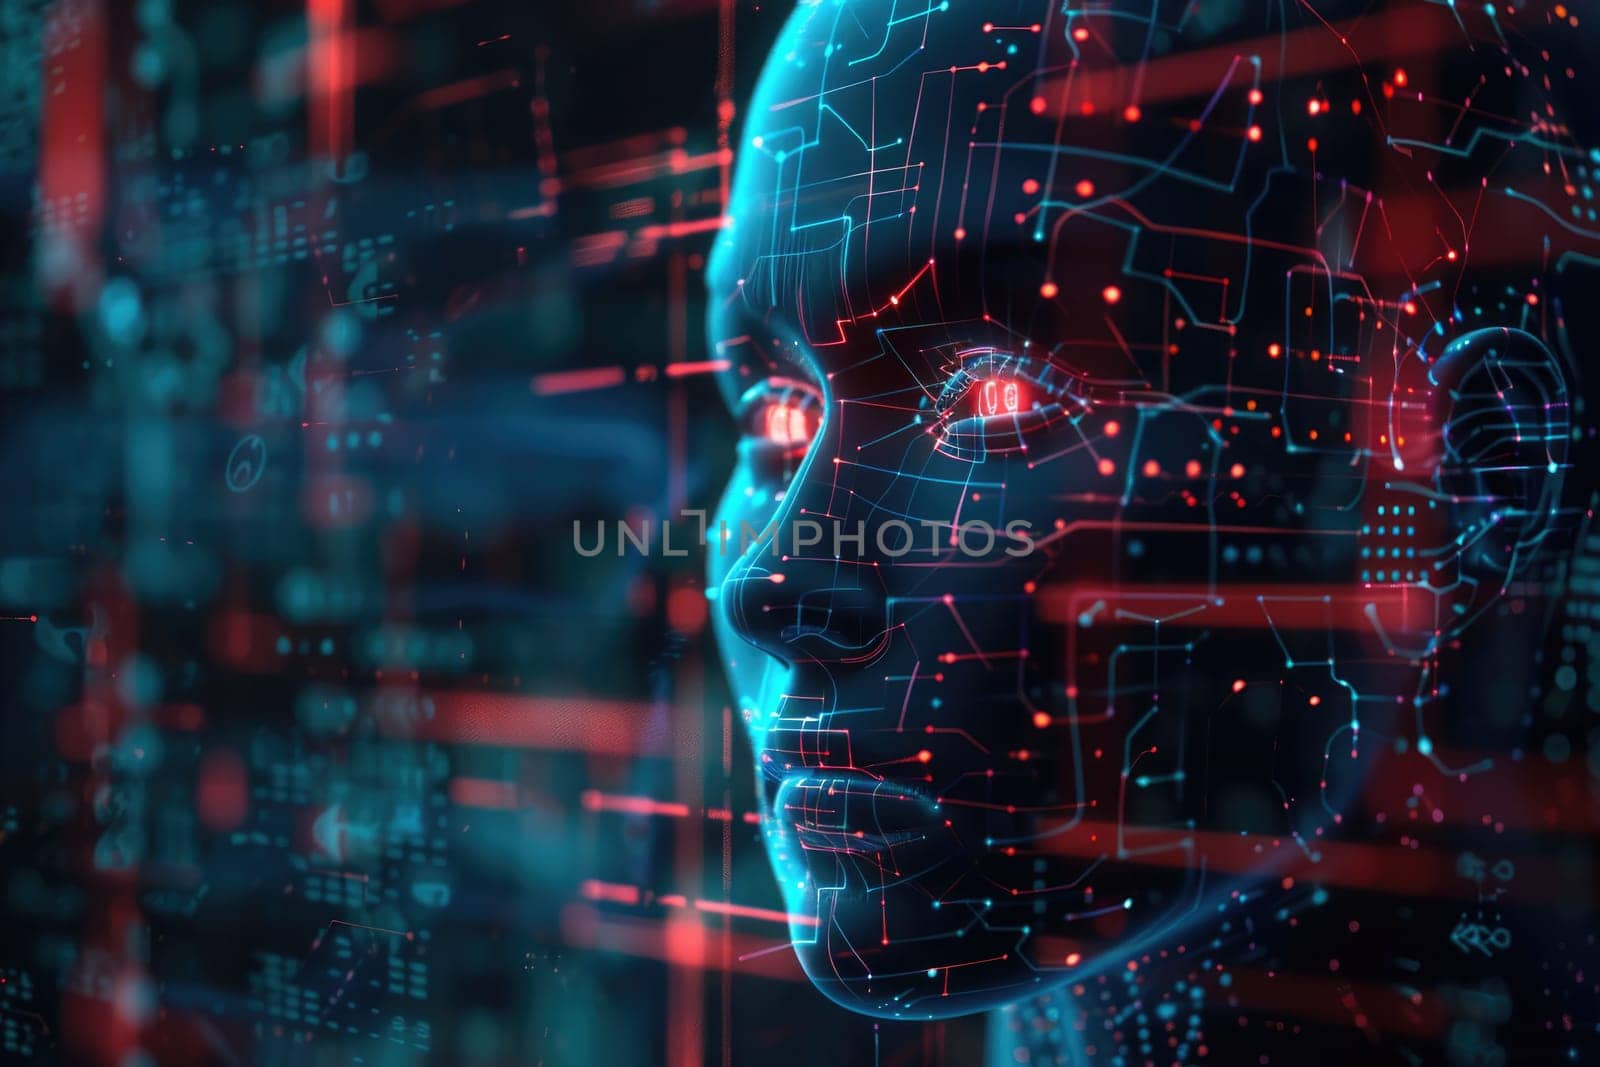 A woman's face is shown in a computer screen with a lot of red and blue lines. Concept of technology and artificial intelligence, as the woman's face is made up of circuits and wires